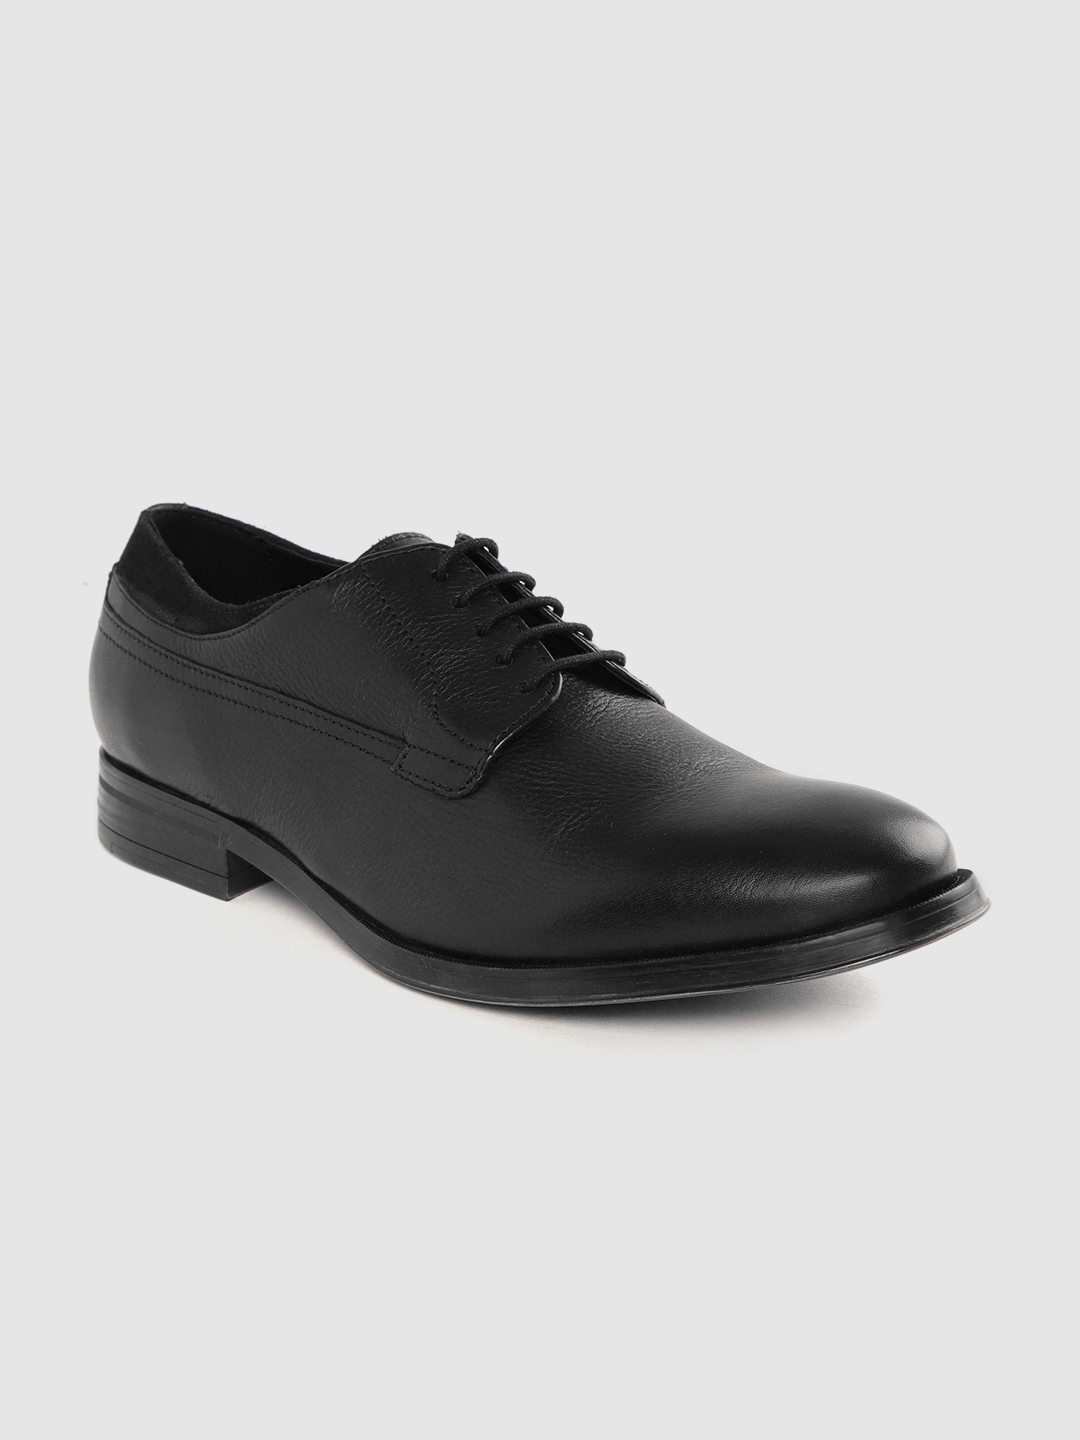 84 Casual Bxxy black formal shoes for Women